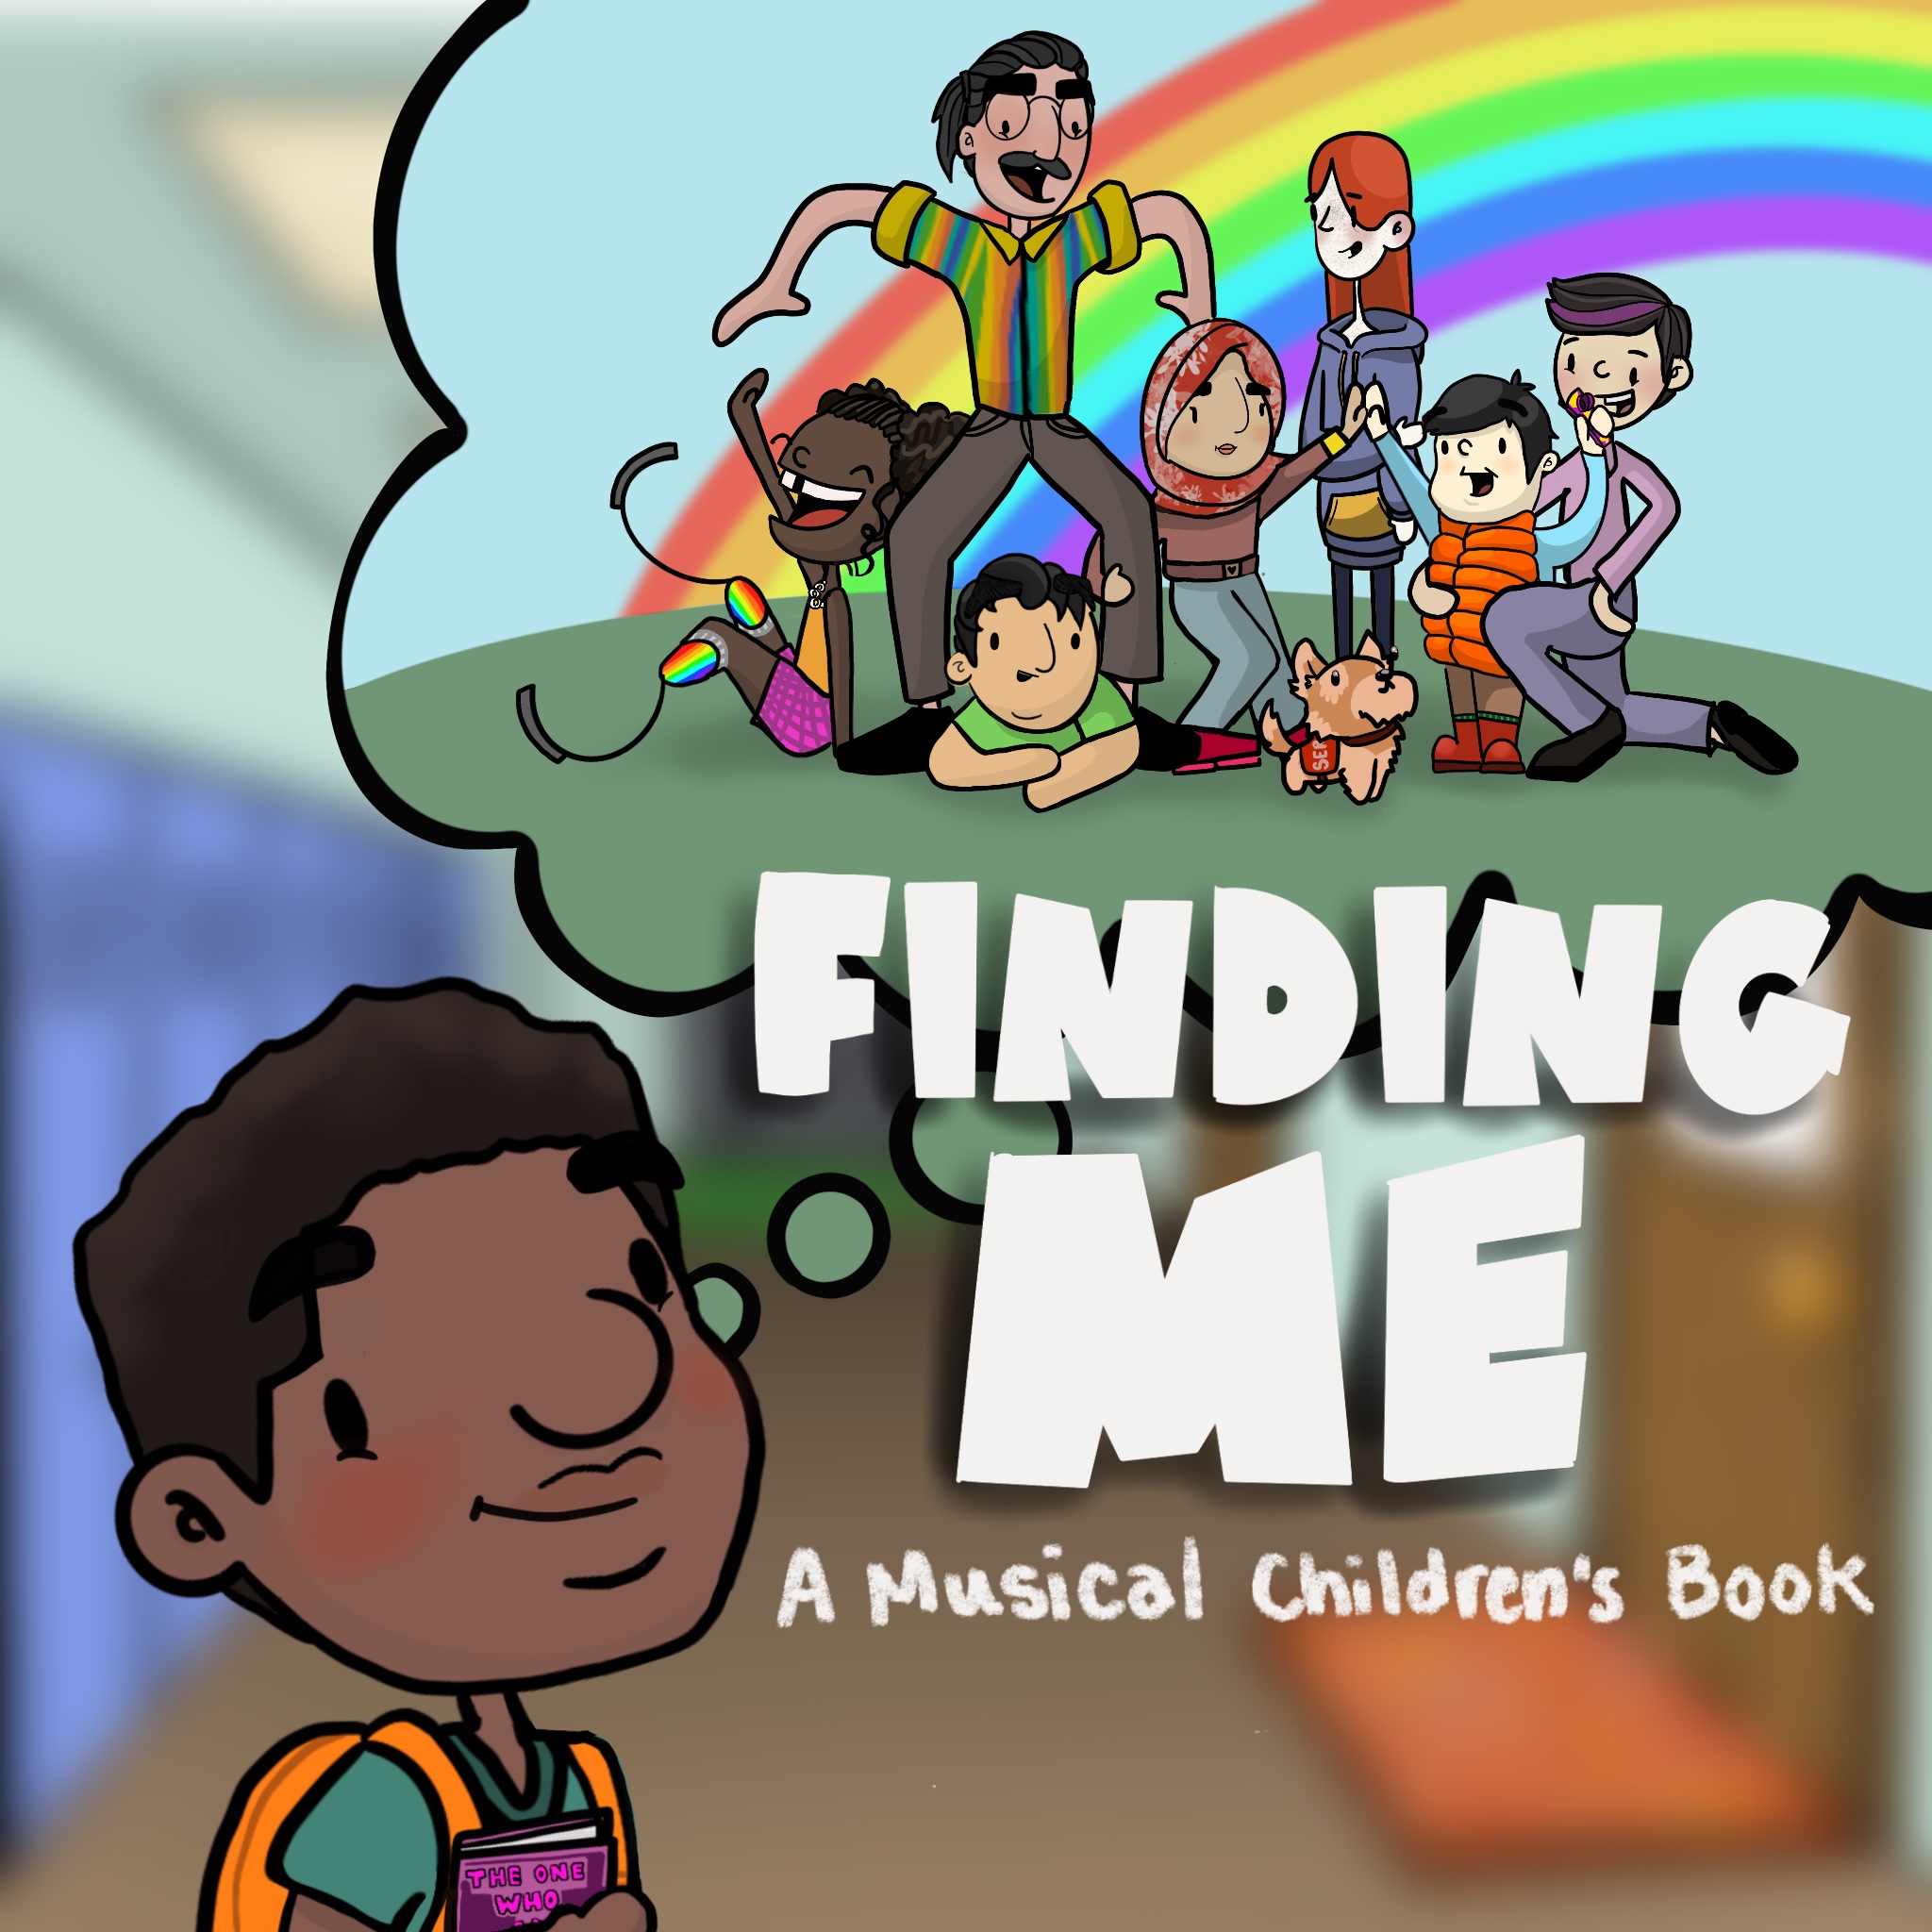 Illustration of a boy imagining a diverse group of friends under a rainbow. Text reads: Finding Me: A Musical Children's Book